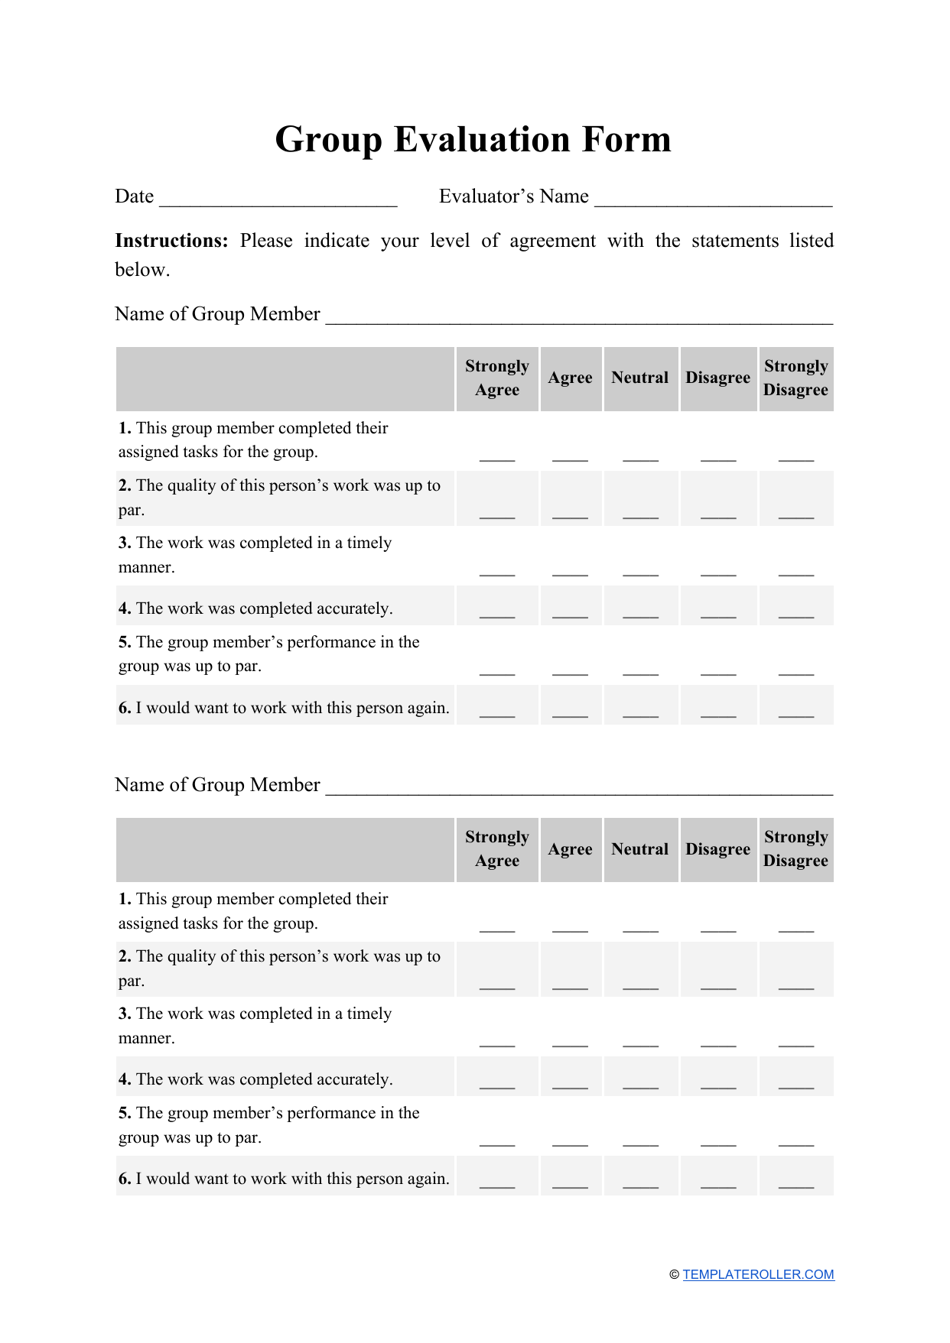 Group Evaluation Form, Page 1